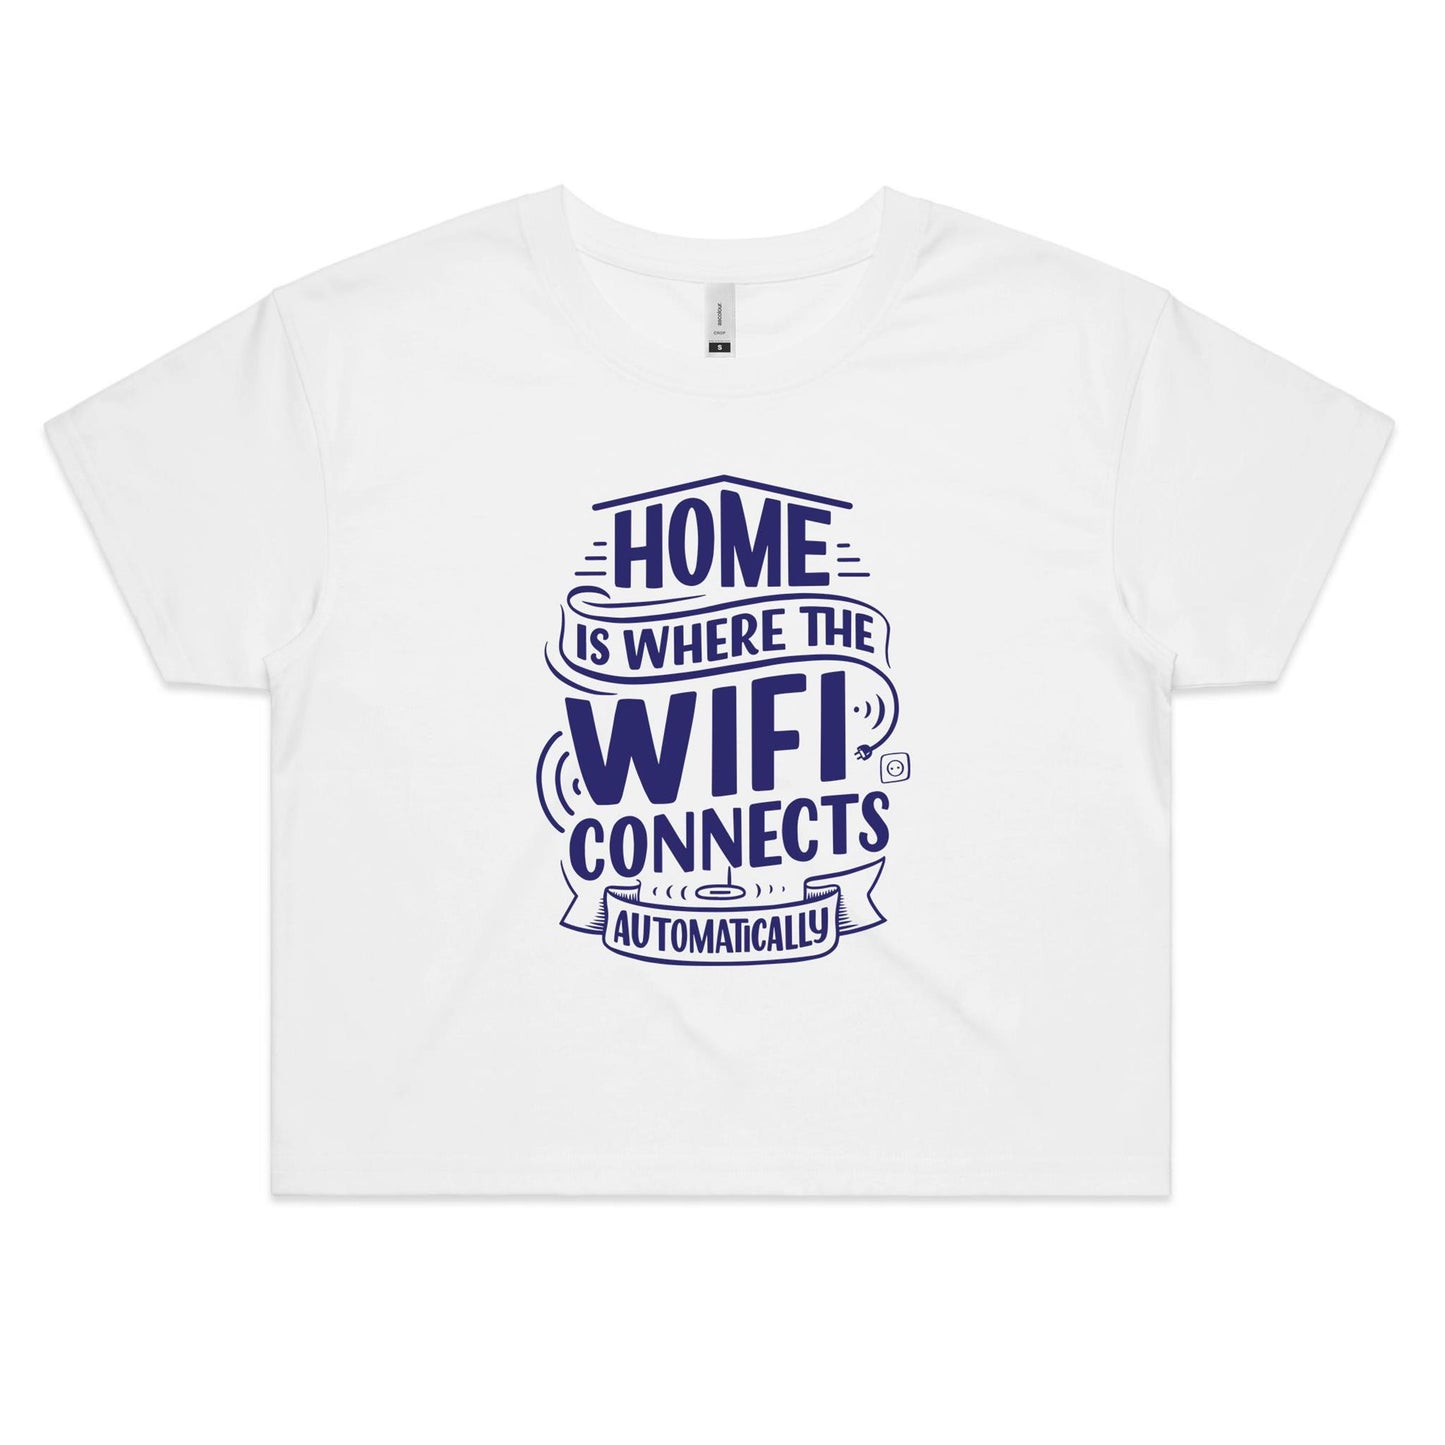 Home Is Where The WIFI Connects Automatically - Women's Crop Tee White Womens Crop Top Tech